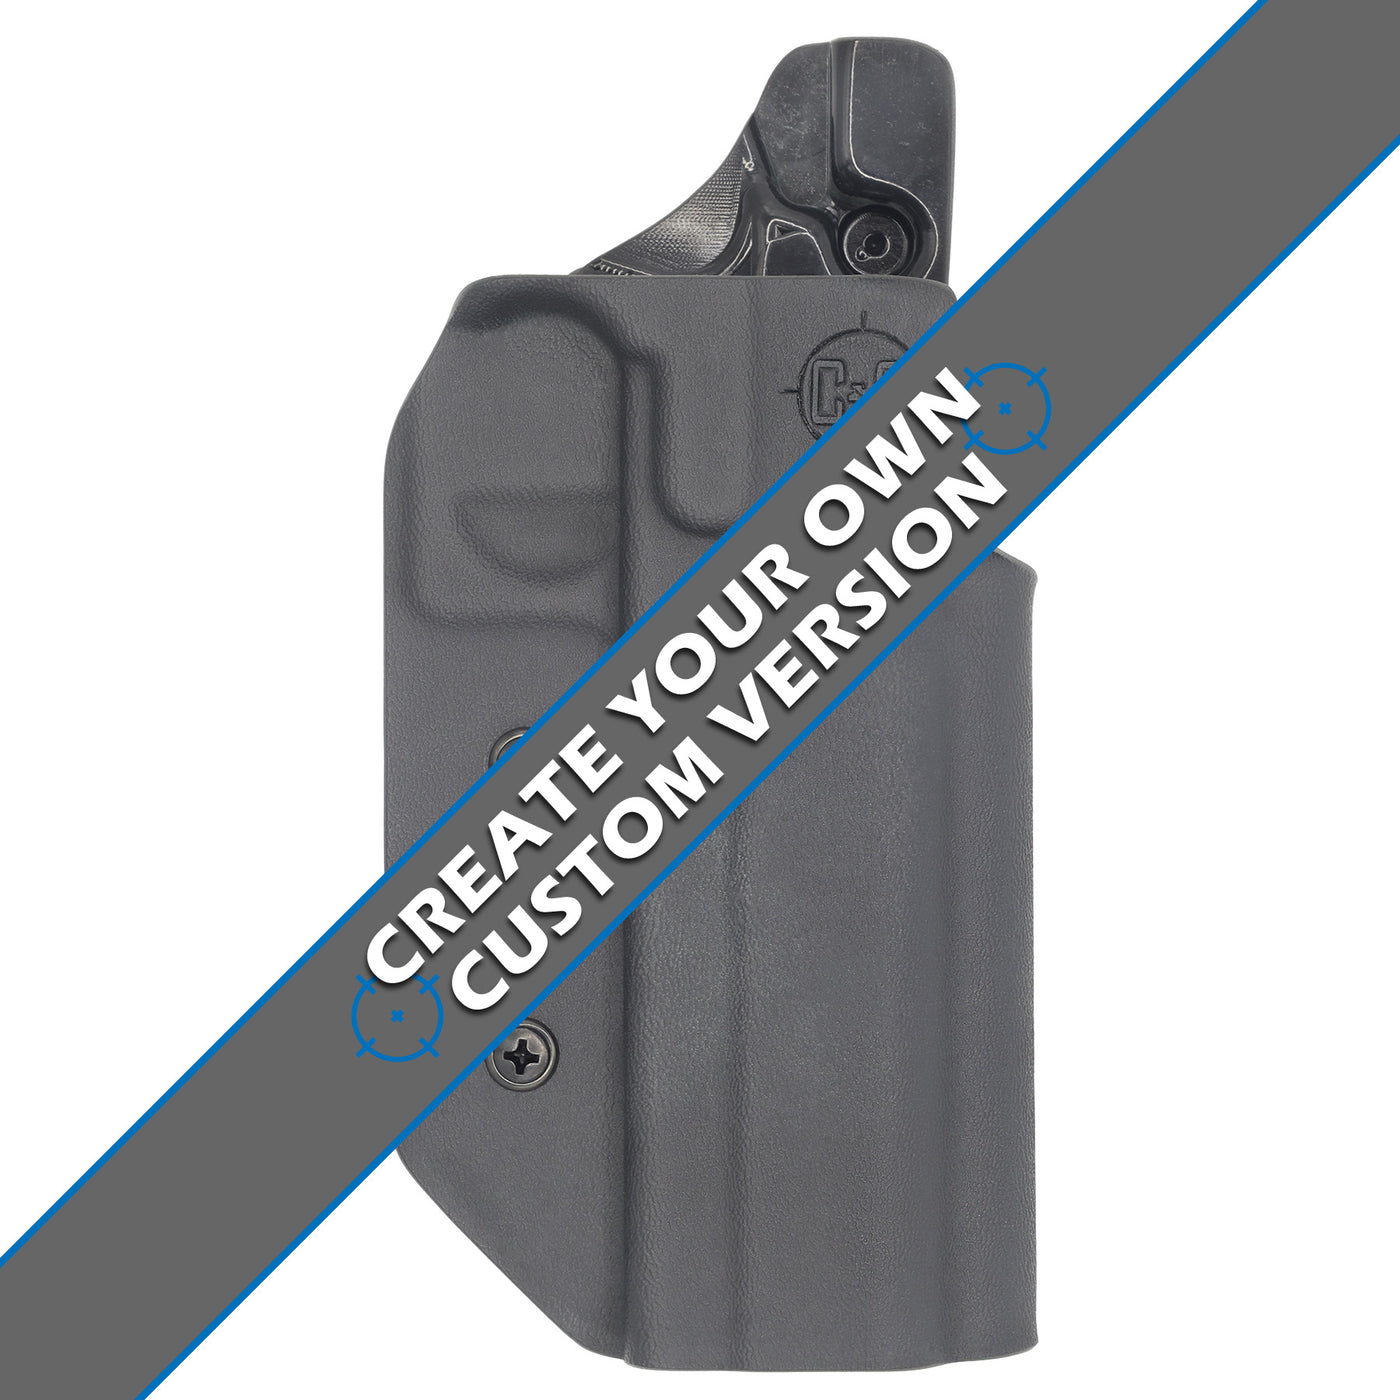 Shown is a custom C&G Holsters Competition Starter Kit that is IDPA, USPSA & 3-GUN legal for STI STACCATO 2011